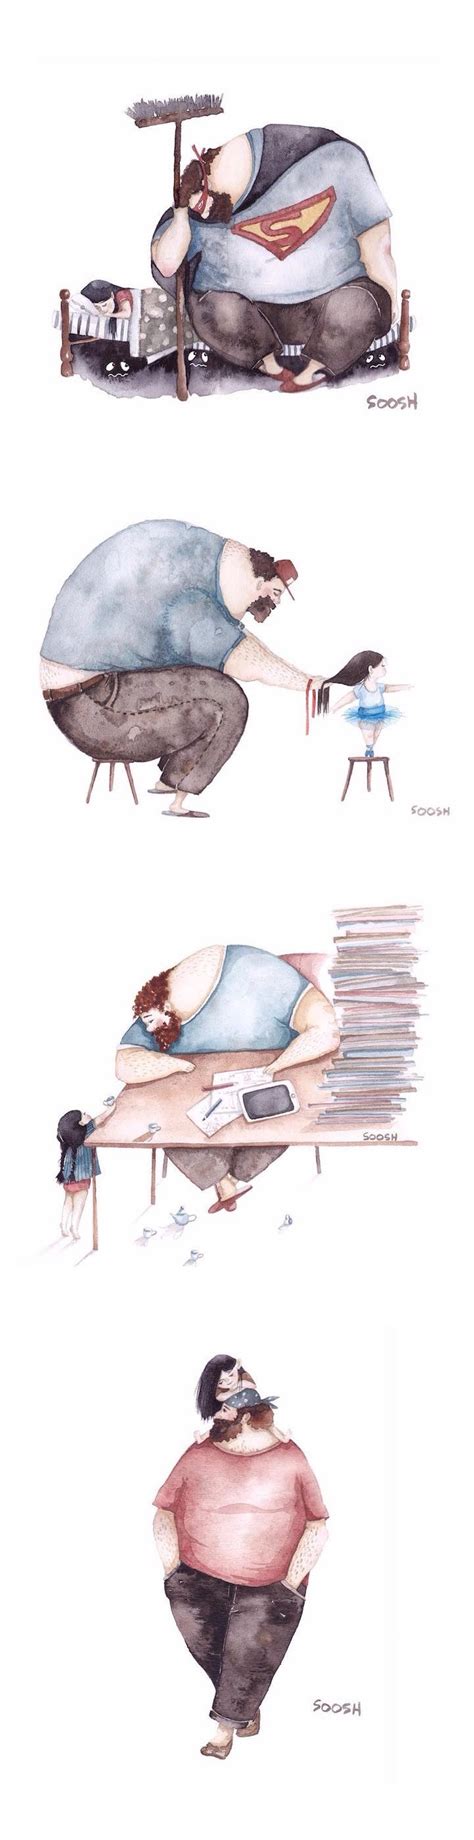 heartwarming watercolors honor the unbreakable bond between do it all dads and their daughters